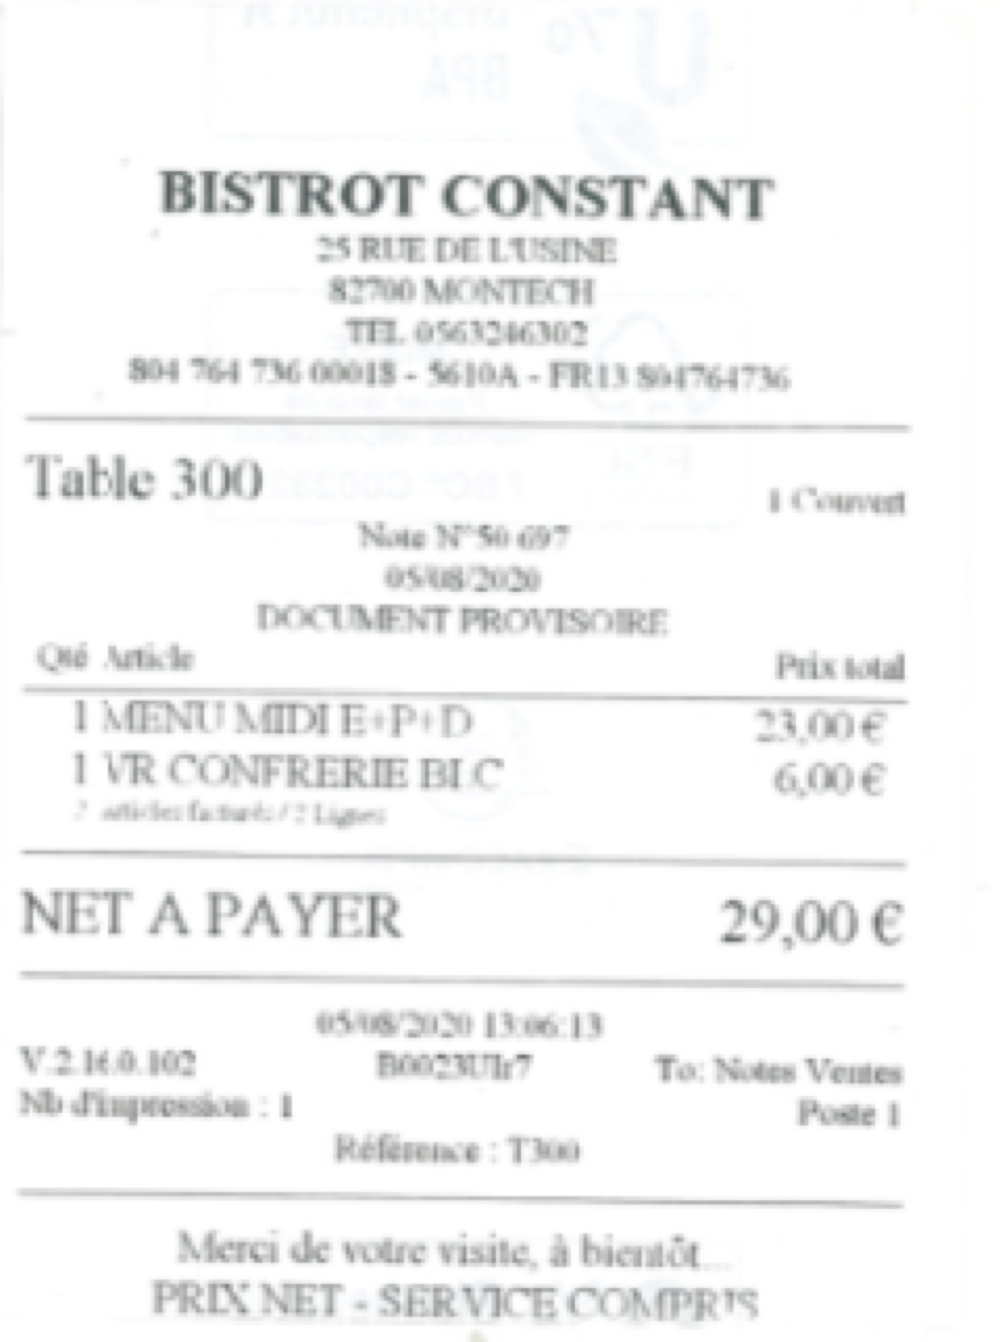 12_03_51_796_82700_Bistrot_Constant.png